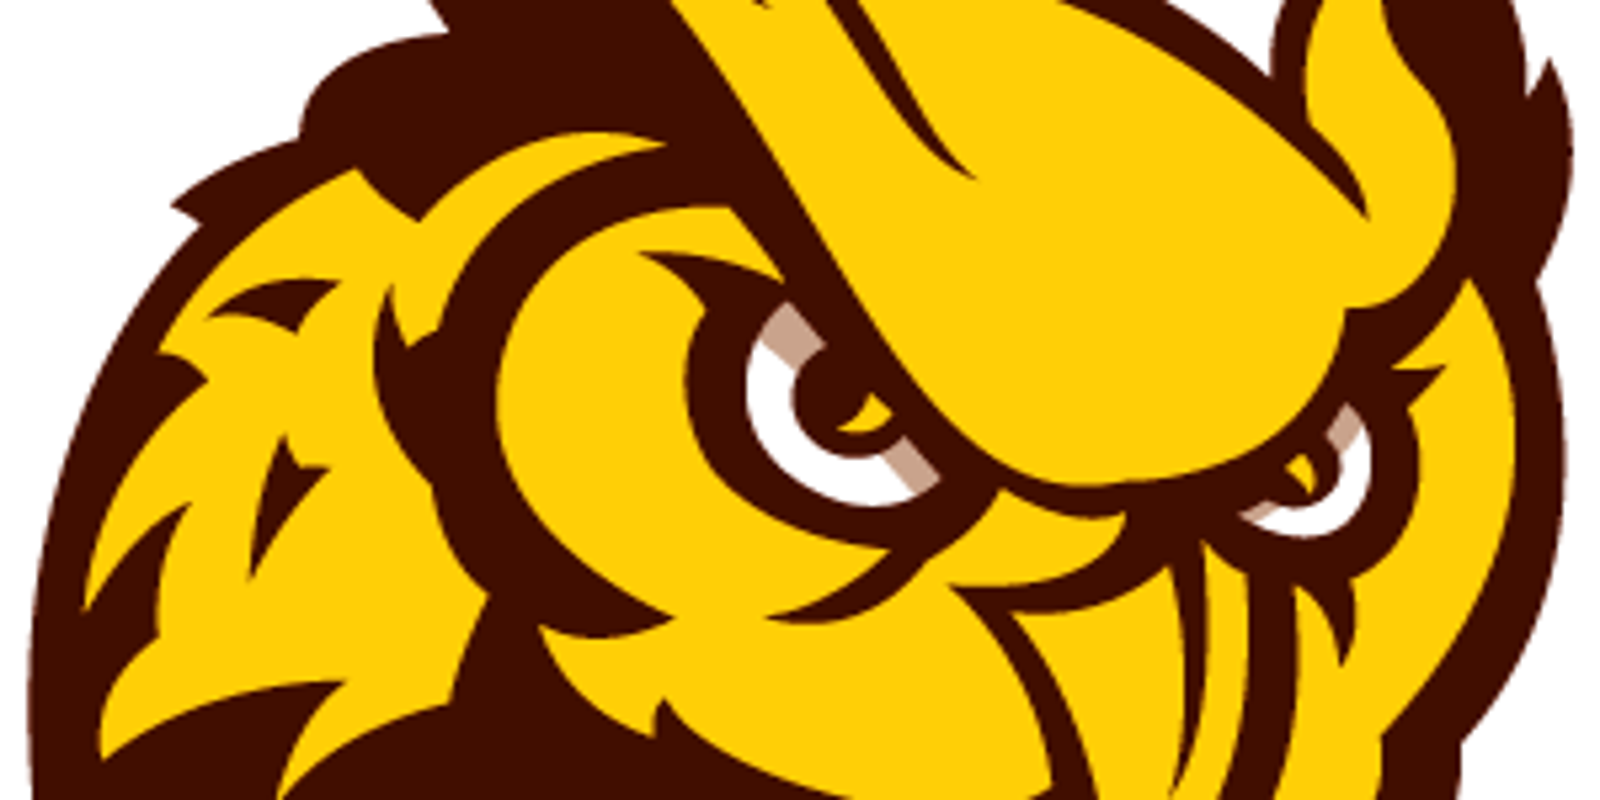 Rowan University Athletic Hall of Fame announces Class of 2020